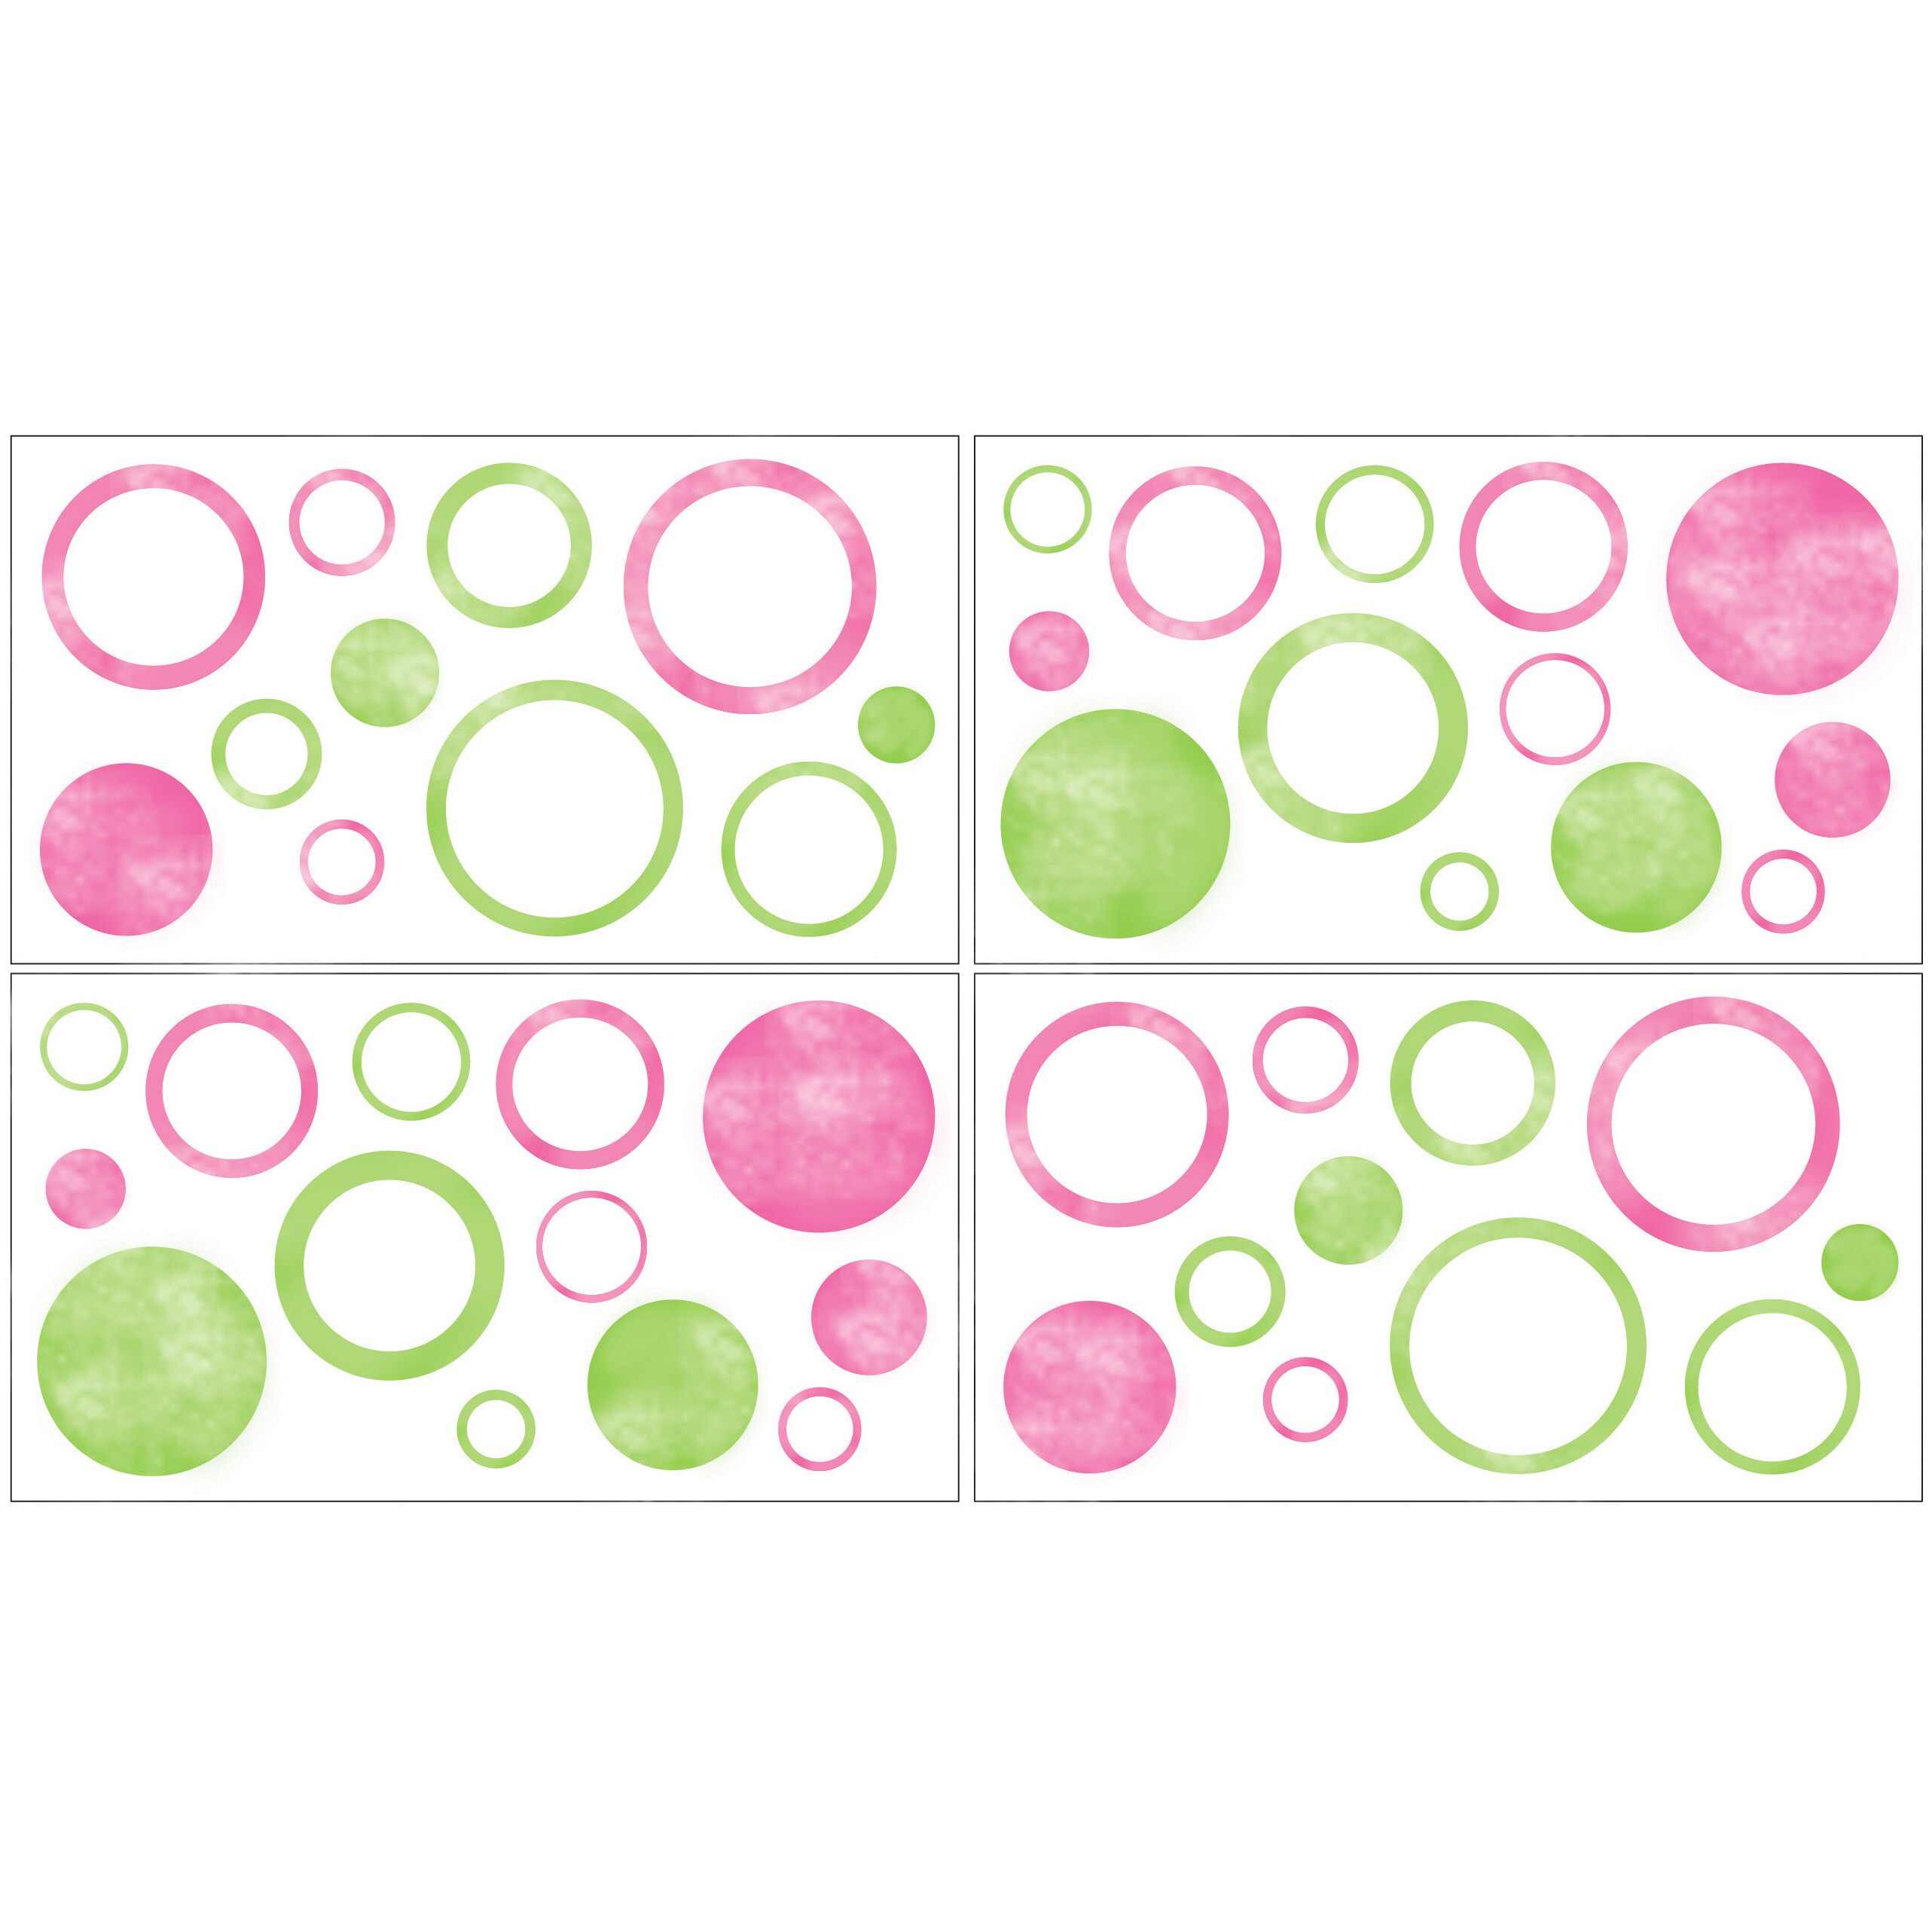 Sweet Jojo Designs Modern Circles Wall Decal Stickers (set Of 4) (PaperHanging instructions Easy peel and stick backingDimensions (each) 10 inches high x 18 inches wideNOTE These decals are intended for standard flat wall finishes and may not adhere co